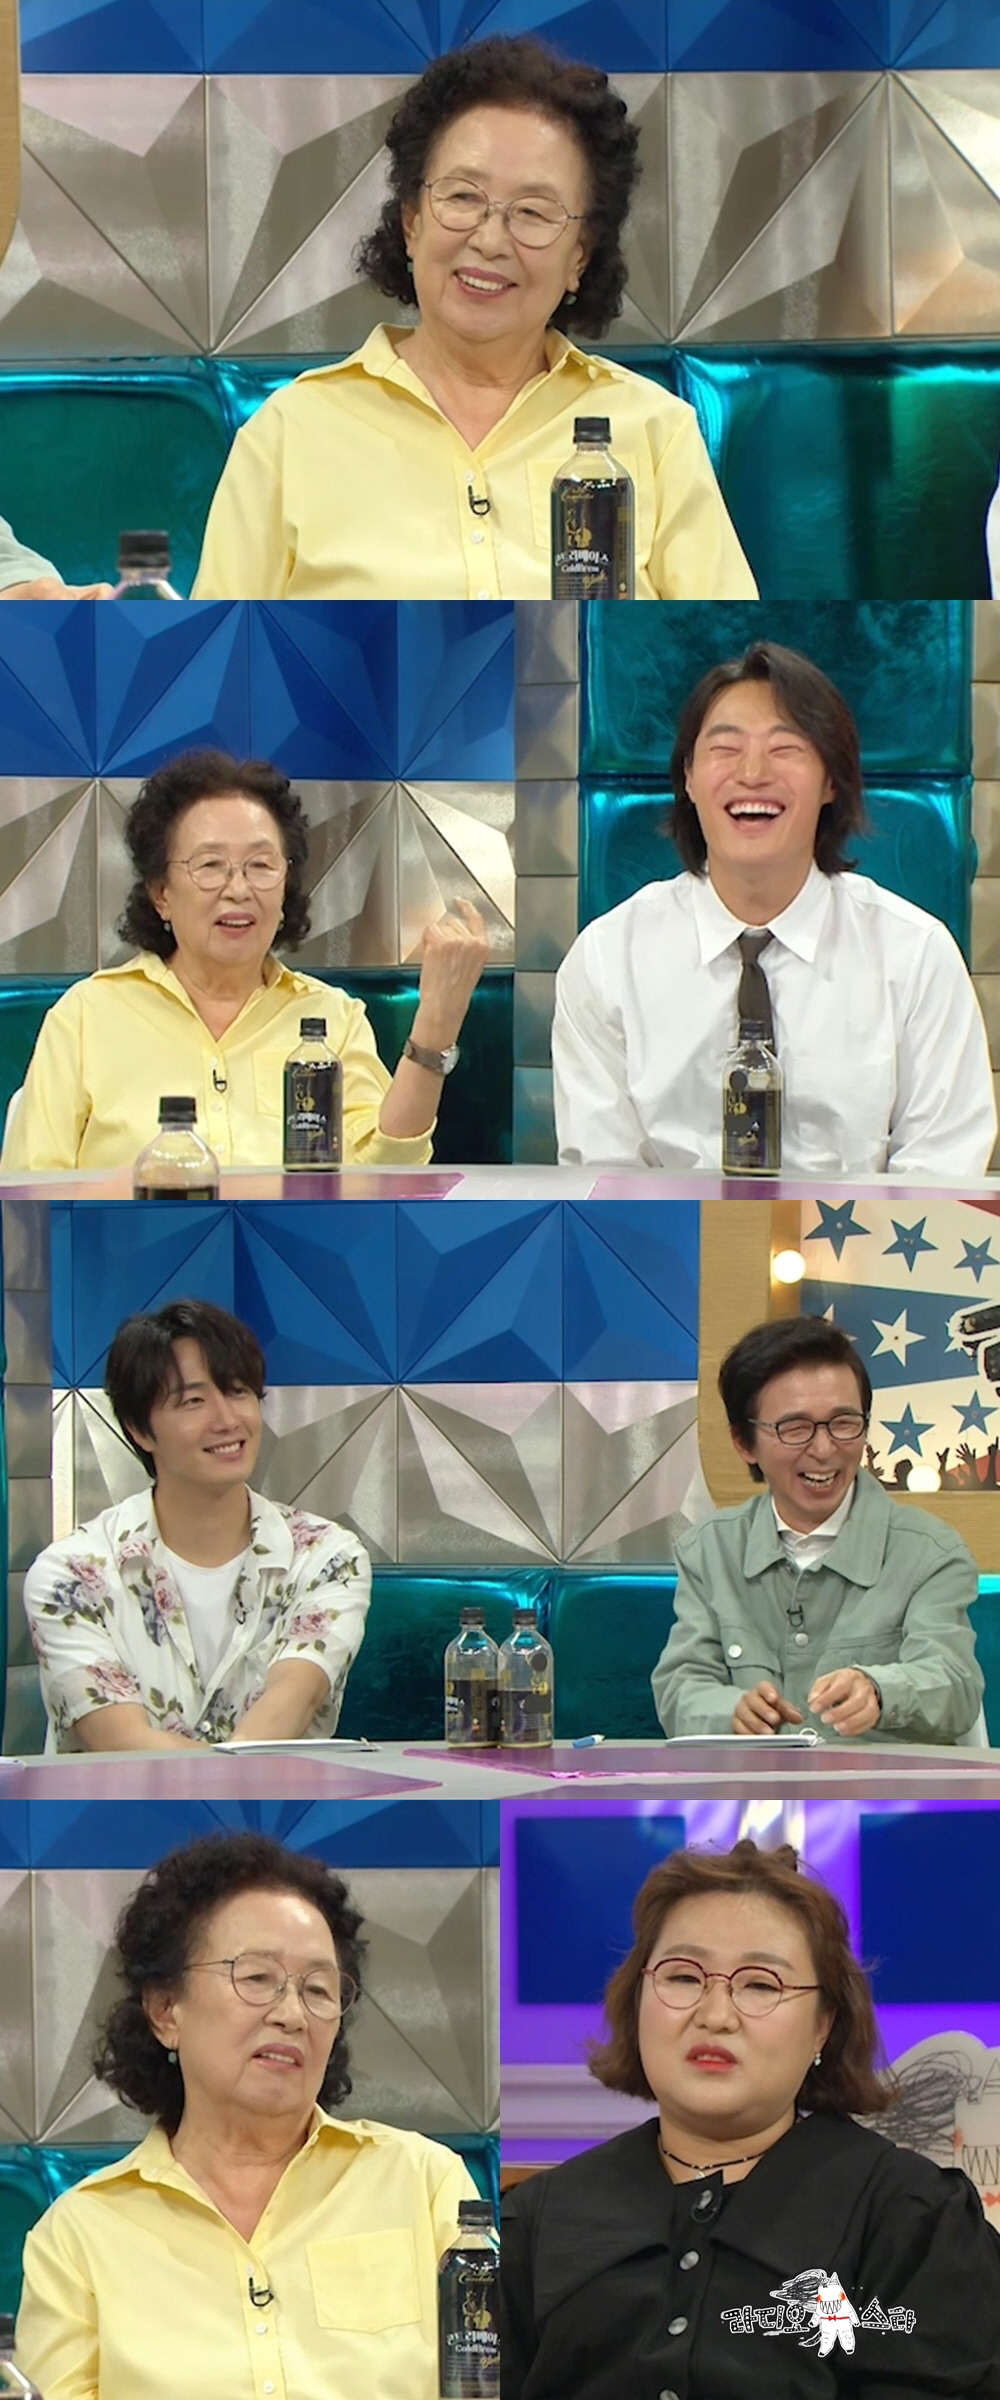 MBC Radio Star (planned by Ahn Soo-young / directed by Choi Haeng-ho), a high-quality talk show scheduled to air at 10:50 p.m. on Wednesday, the 19th, will be released with Na Moon-hee, Lee Hee-joon, Choi Won-young and Lee Su-ji.Special MC will be accompanied by actor Jung Il-woo, who is a special relationship with Na Moon-hee.Na Moon-hee, Lee Hee-joon, Choi Won-young, and Lee Soo-ji have a common point of being a late actor who turned to other actors.Among them, Na Moon-hee made his debut in the entertainment industry in 1961 as a voice actor for MBC Radio 1st public service, and won the title of National Mom by performing performances in more than 100 dramas and movies.In September, the movie Oh! Moon Hee meets the audience.Na Moon-hee recalls her first chemi in Oh! Moon Hee, which was giddy with Lee Hee-joon, who had cap breathing.Na Moon-hee said, Its terrible to think about it now, after recalling the situation at the time, I really am on stage. Lee Hee-joon makes Lee Hee-joon shrug because he was worried about retirement for the first time in his 60-year acting life.It really raises curiosity about what happened to them.Lee Hee-joon Confessions an unexpected entertainment trauma: entertainment half-split pain (?Lee Hee-joon, who has a ), asked Lee Seung-gi, who is active as an actor and entertainer before the recording of Radio Star.Radio Star MCs who heard the contents said that they shook their heads from side to side. Lee Seung-gis entertainment advice makes me wonder what it is.Choi Won-young, the third appearance of Radio Star, shows off his passion and over-motivation and unfolds an endless Three-Hang Relay. When asked about his past remarks, he shows symptoms of memory loss and makes him laugh.Na Moon-hee and Lee Hee-joons dizzying first chemistry can be found on Radio Star, which is broadcasted at 10:50 pm on Wednesday, 19th.On the other hand, Radio Star is loved by many as a unique talk show that unarms guests with the dedication of a village killer who does not know where 4MCs are going and brings out real stories.